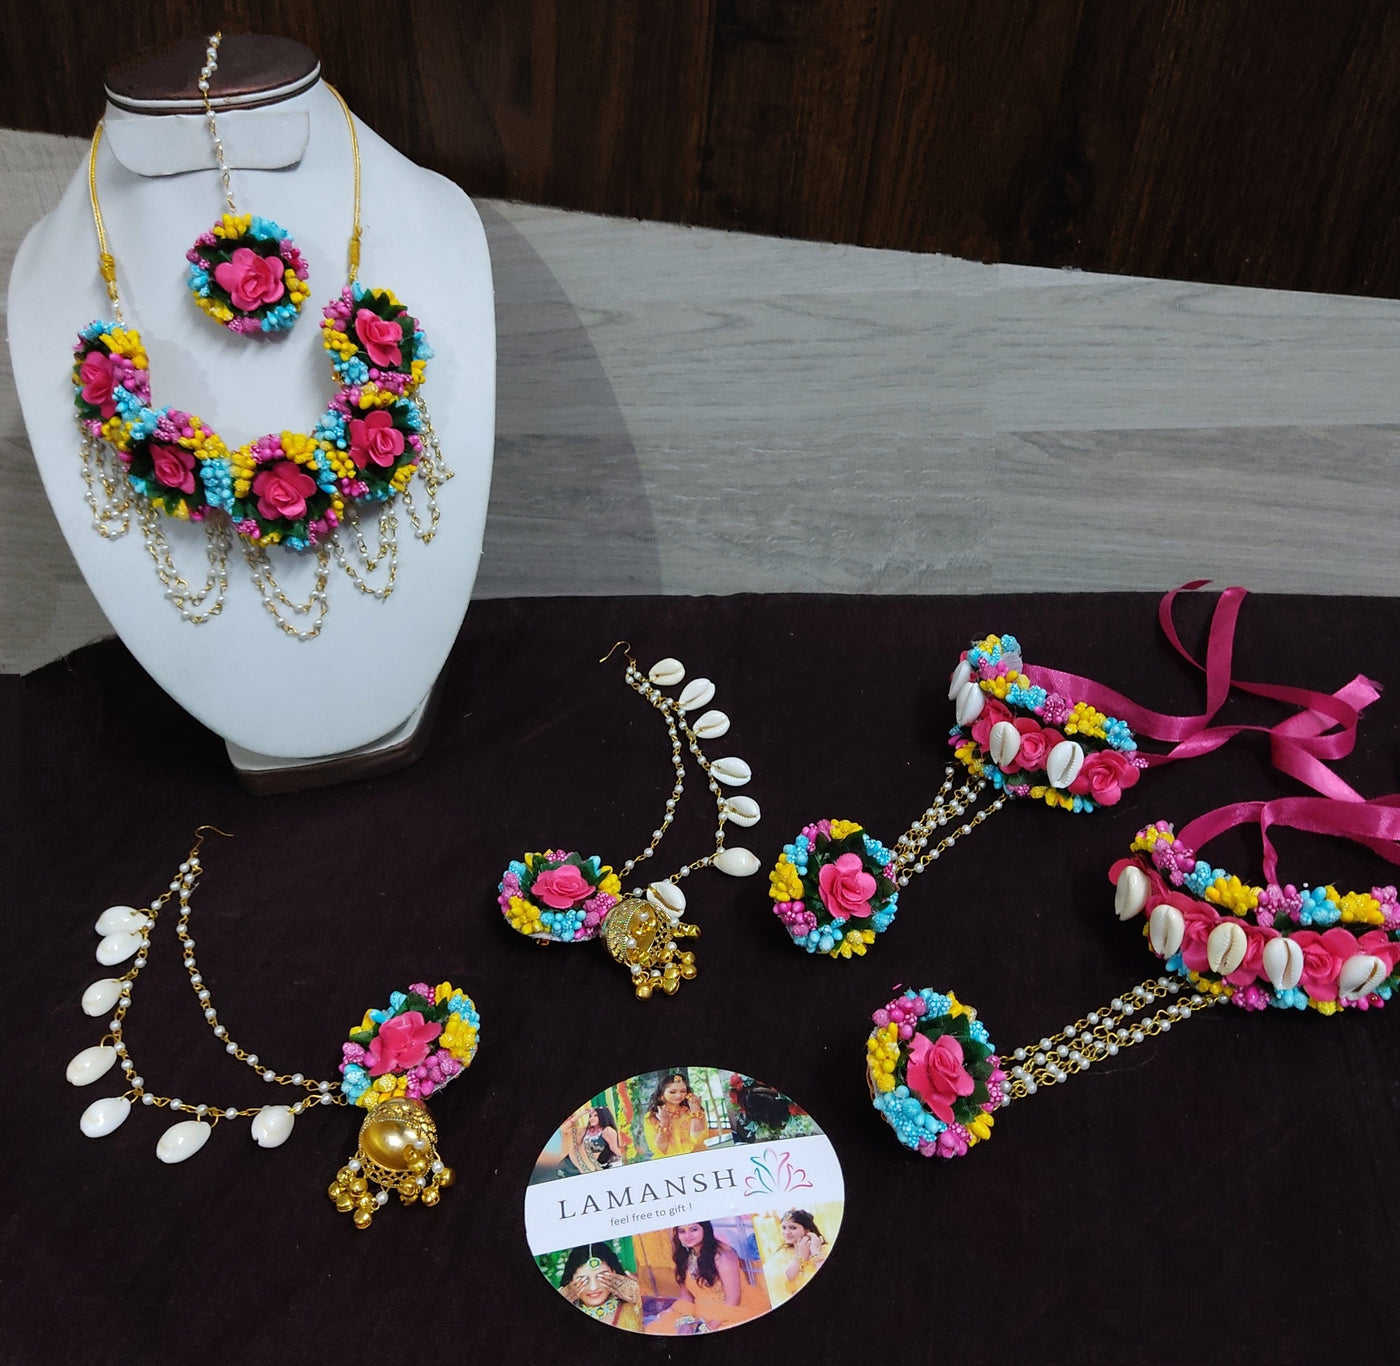 LAMANSH Flower 🌺 Jewellery with shells Pink Blue Yellow / Standard / Shells 🐚 Style LAMANSH® Multicolored Floral Shells 🌹 Jewellery set for Bride's / Absolute masterpiece for Haldi - Mehendi ceremony